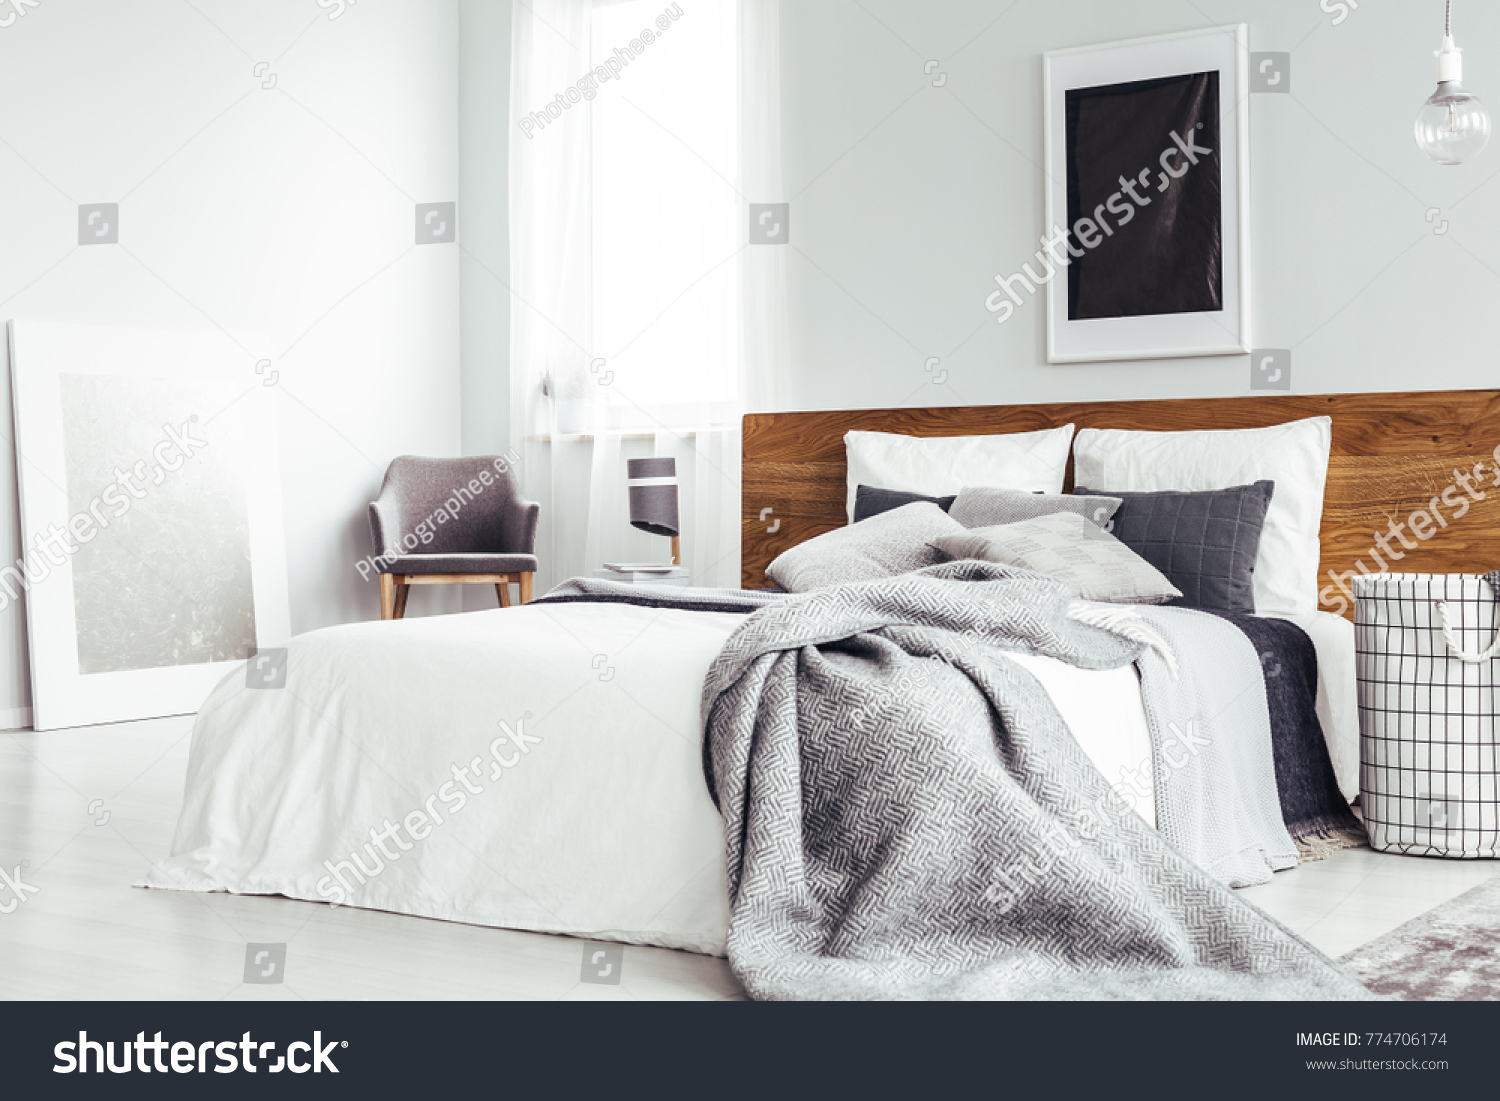 Grey blanket on bed with wooden bedhead in simple bedroom interior with dark poster and chair under window #774706174